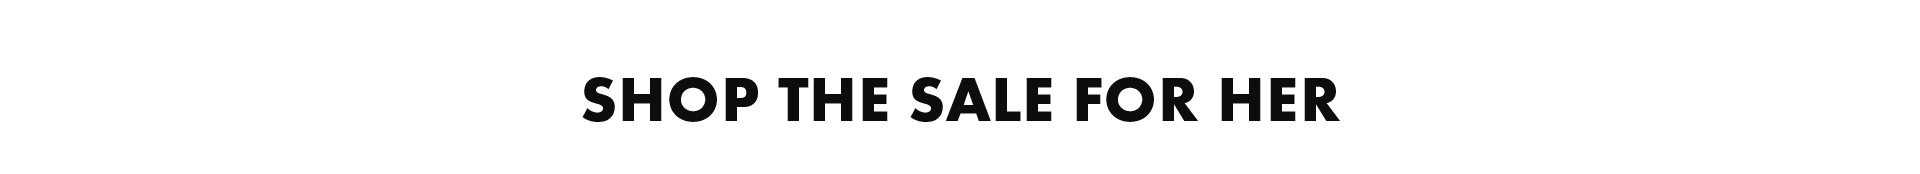 Sale Frenzy - 30% - 50% off RRP*